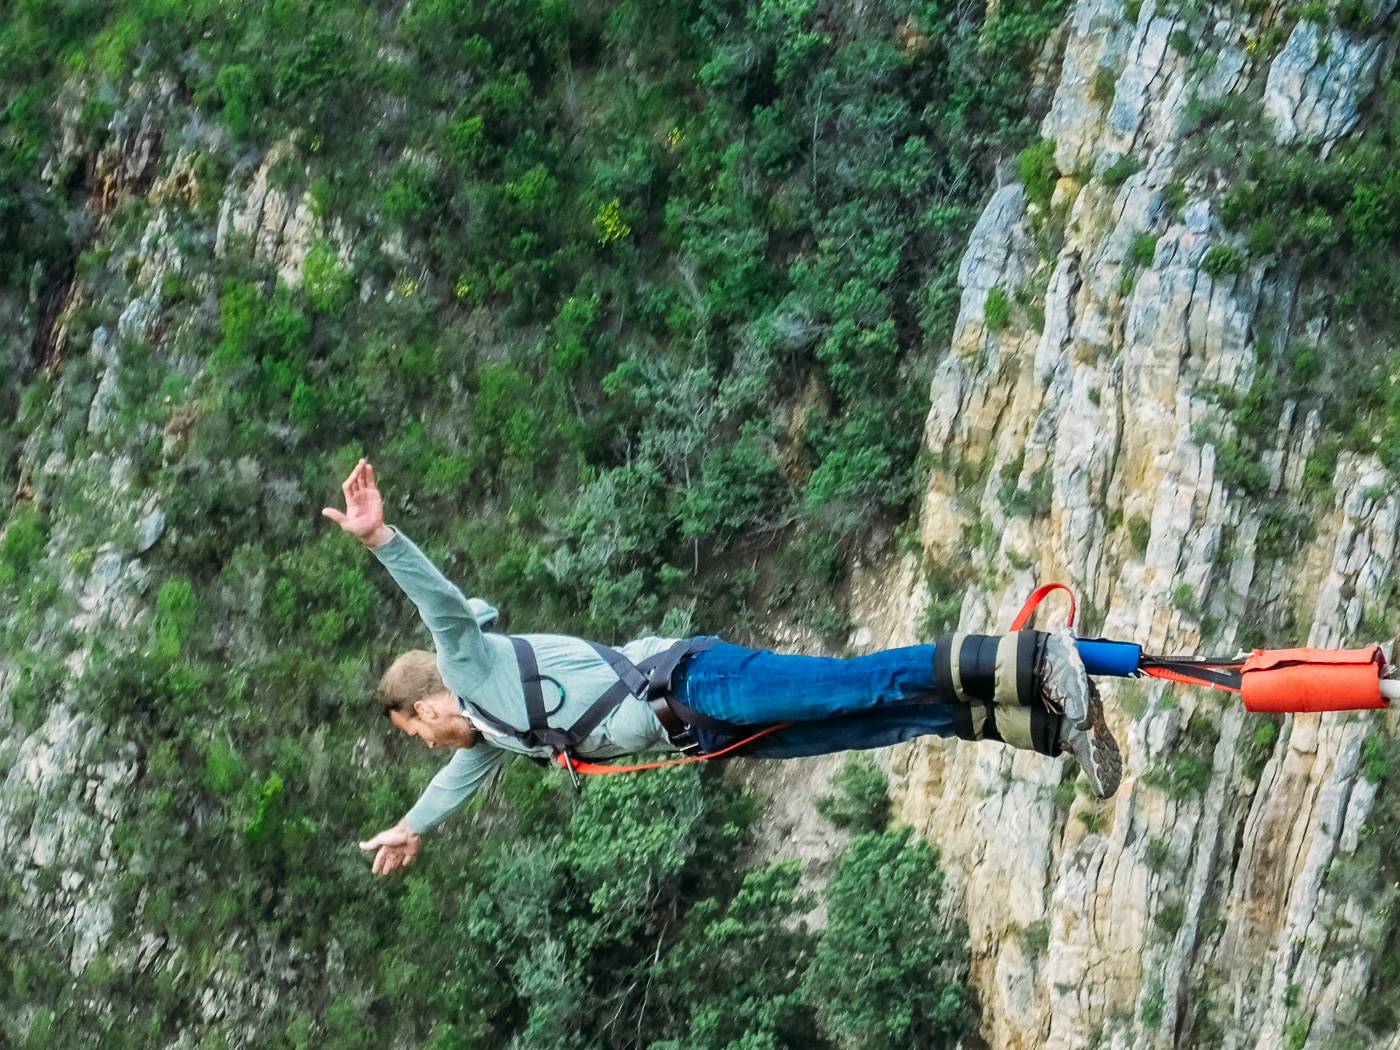 Full body adrenaline rush after my Bloukrans Bridge bungee jump in South Africa